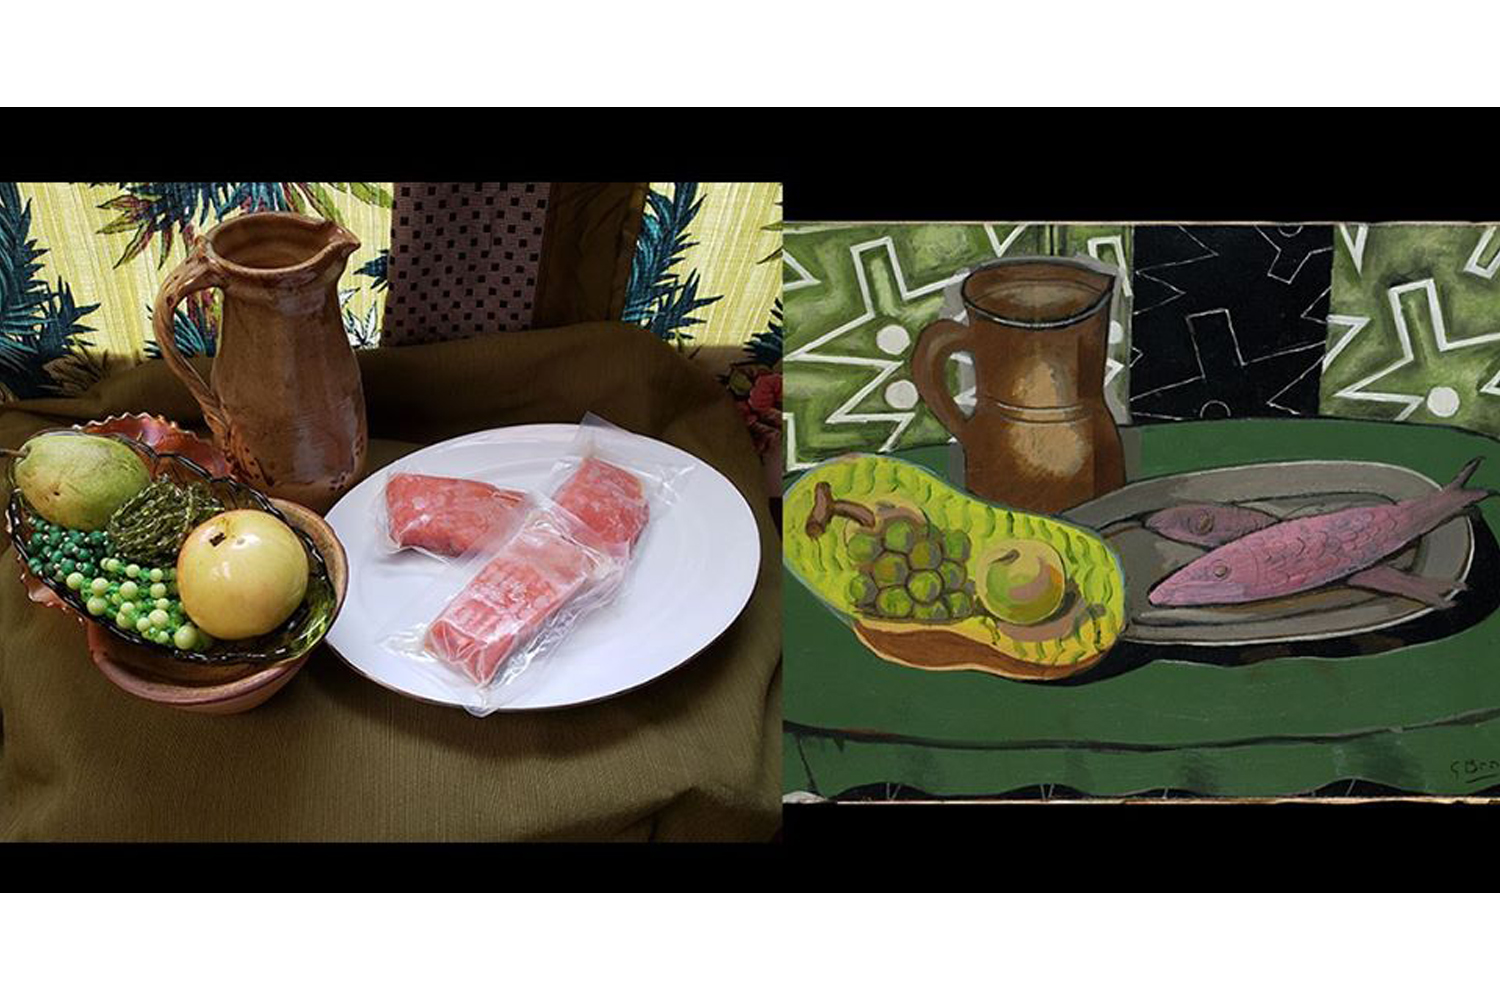 (Right) Georges Braque, Still Life with Pink Fish (1937), oil on canvas, 17 x 24 in. Indianapolis Museum of Art at Newfields, Bequest of Mrs. James W. Fesler, © Georges Braque / Artists Rights Society (ARS). (Left) Created by Sarah Trew, Newfields